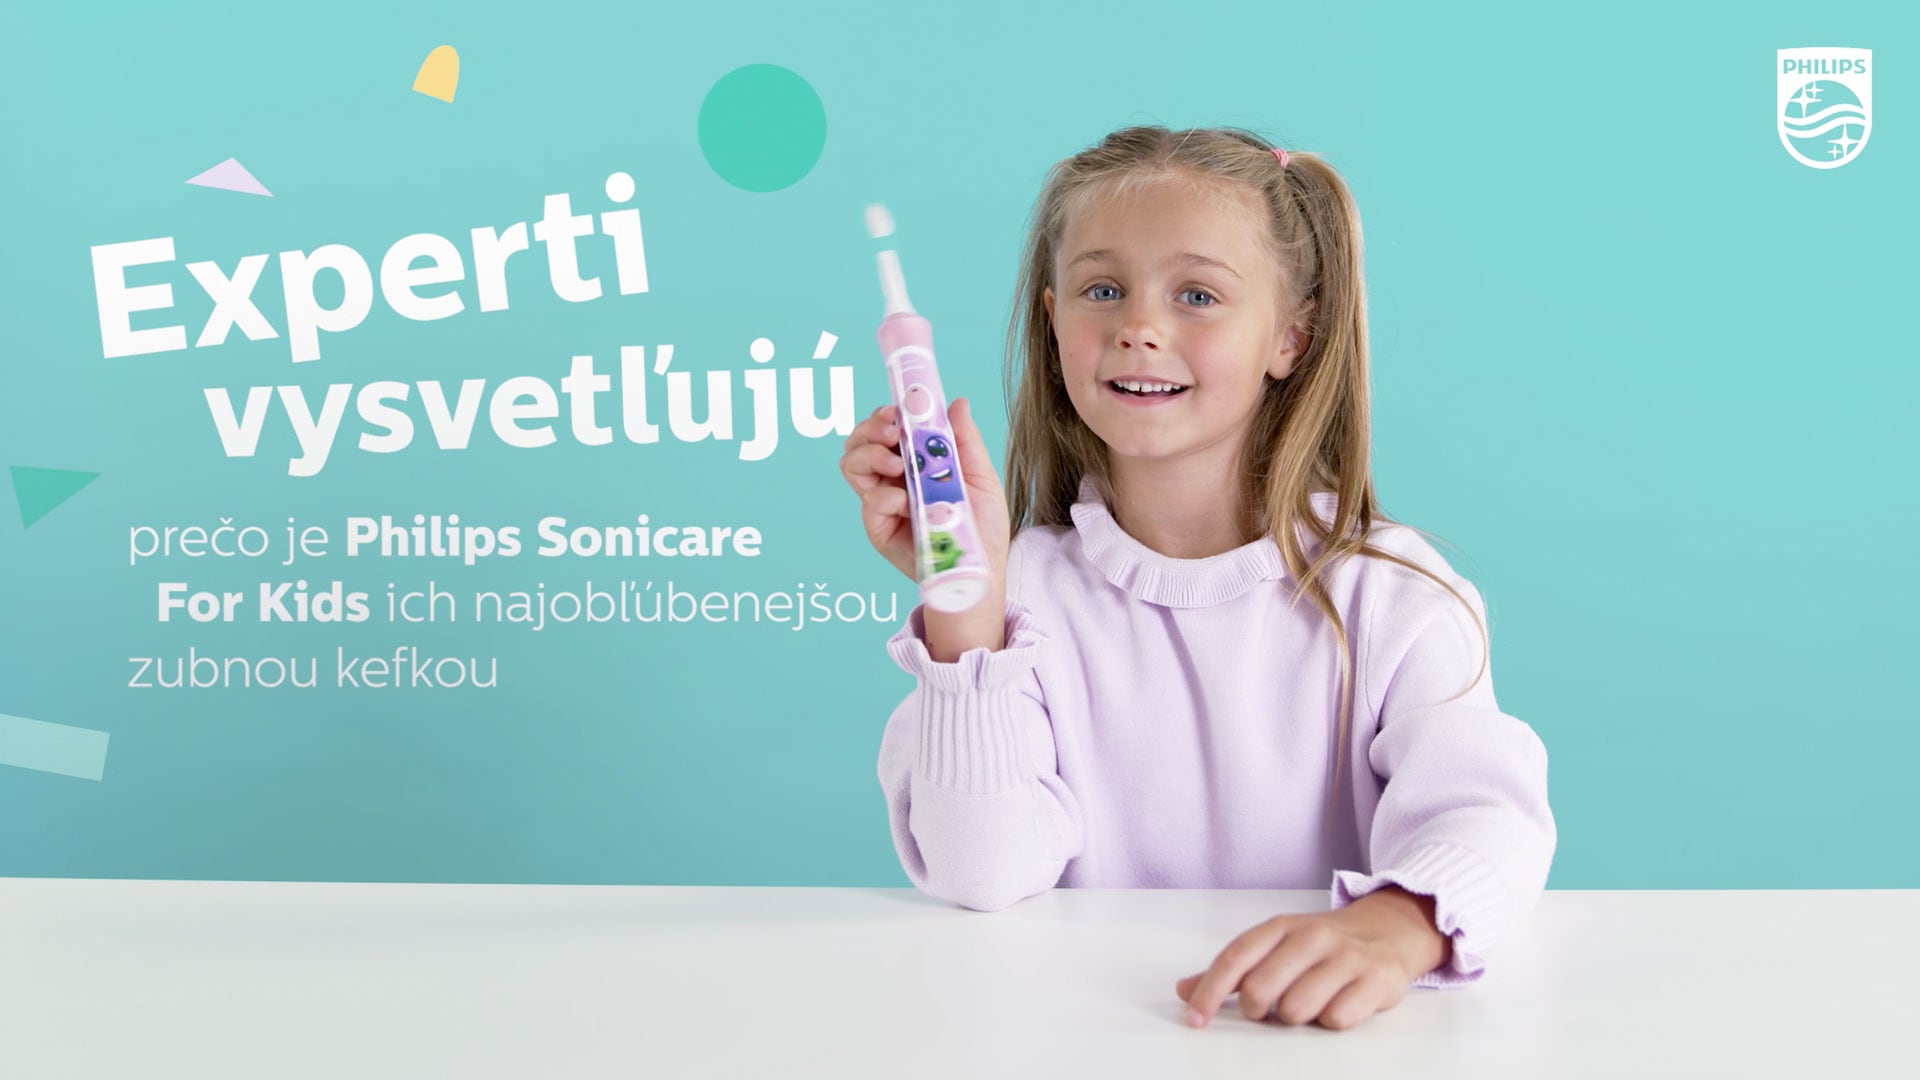 Sonicare for Kids a děti